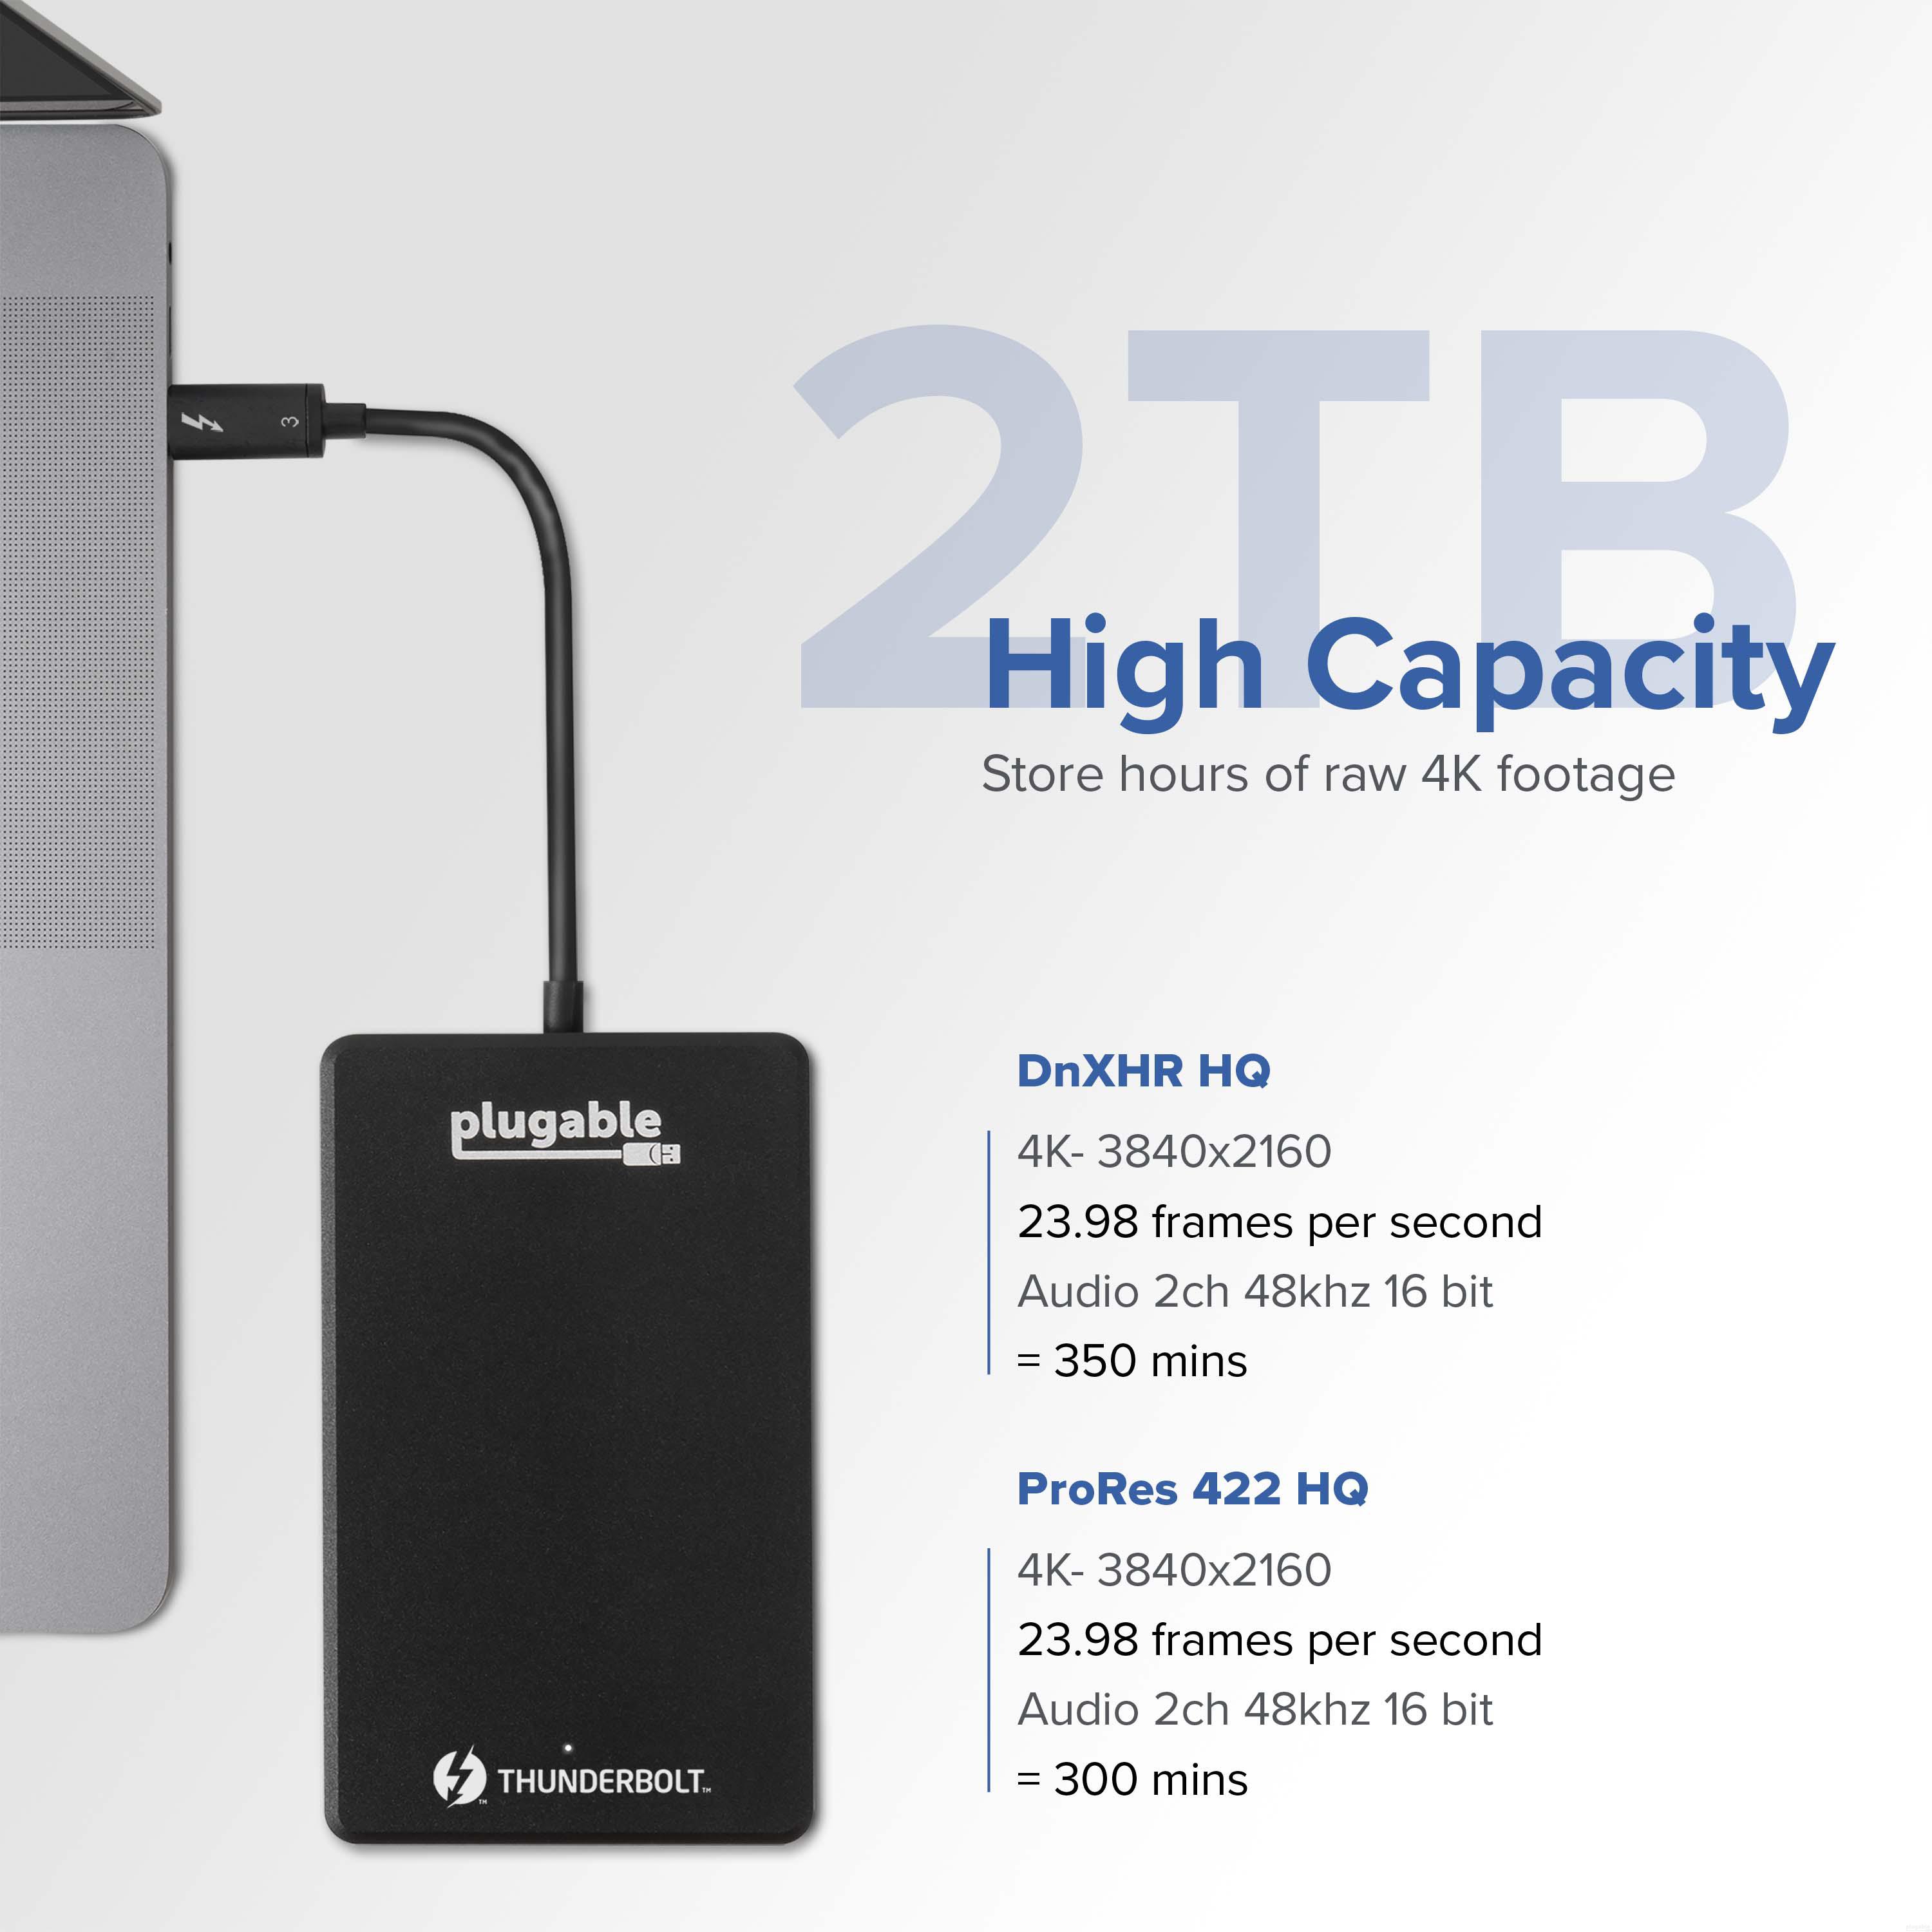 Plugable 2TB Thunderbolt 3 External SSD NVMe Drive (Up to 2400MBs/1800MBs R/W) - image 5 of 9